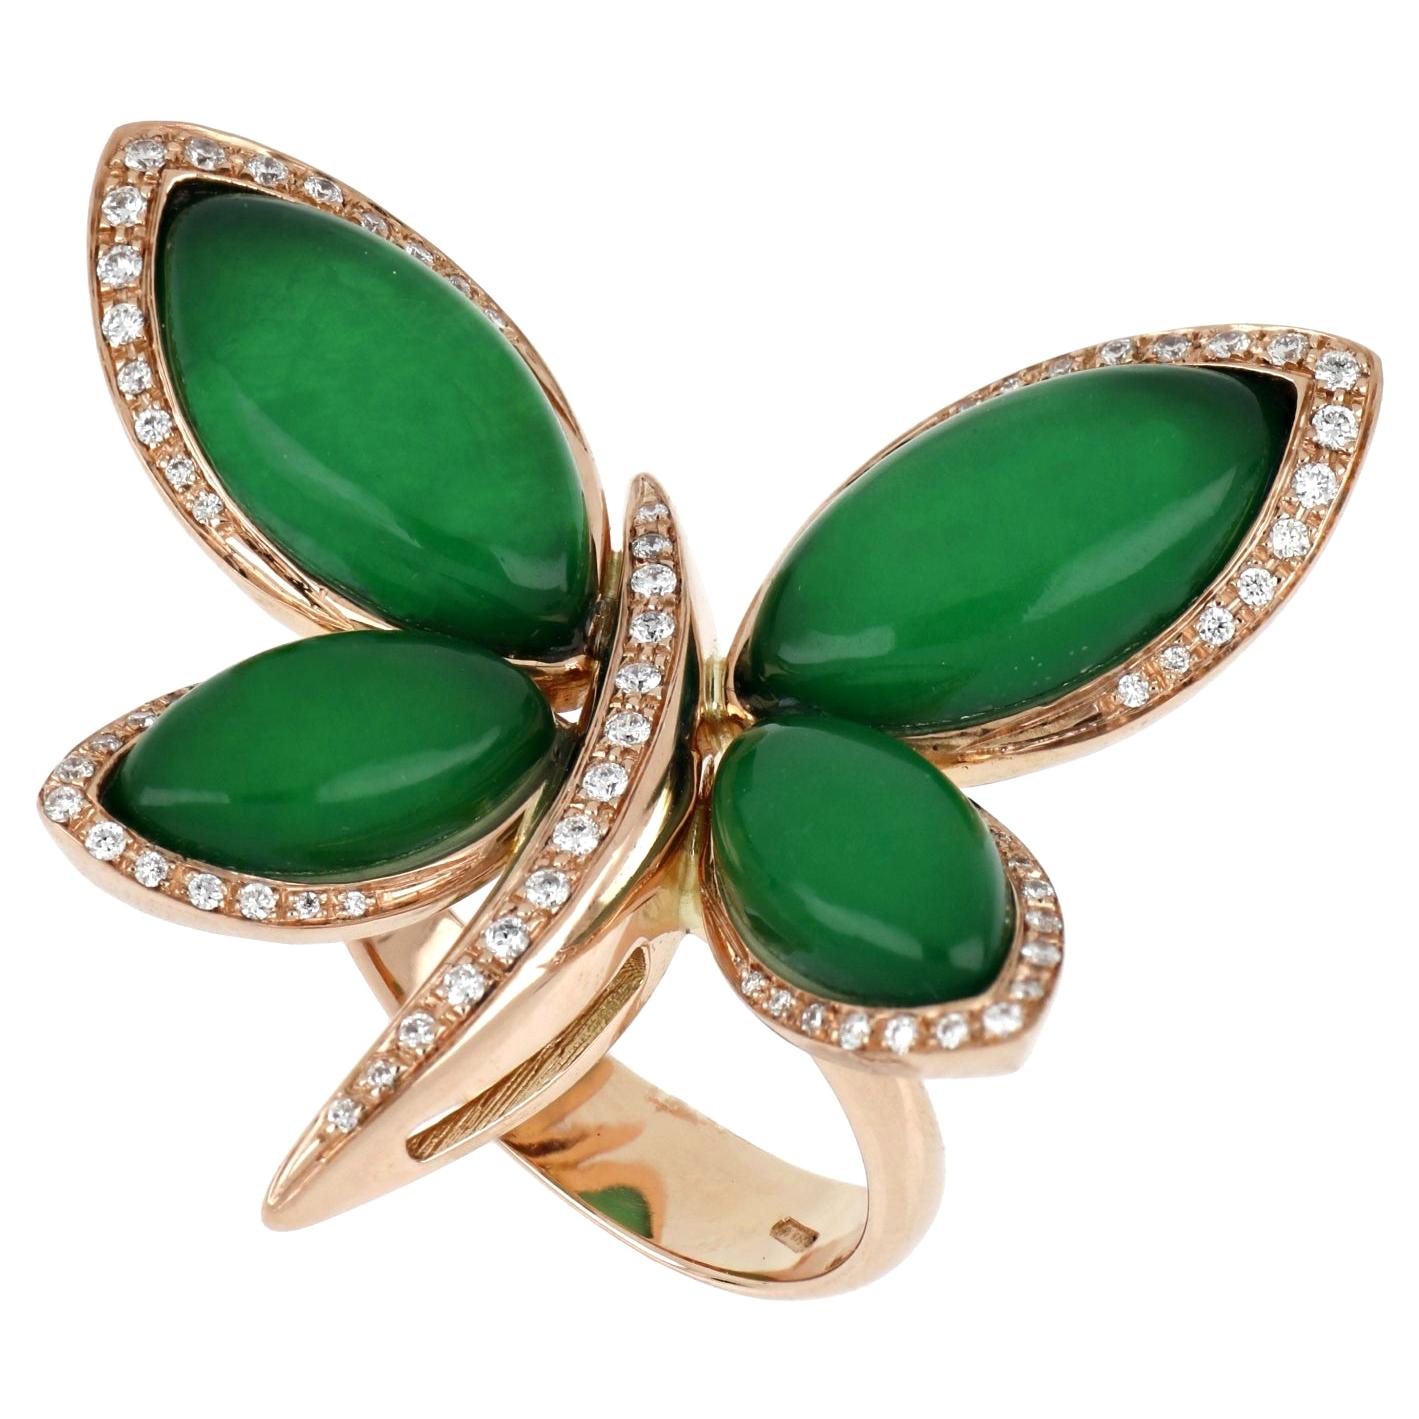 For Sale:  18kt Rose Gold Les Papillons Ring with Green Aventurine and Diamonds